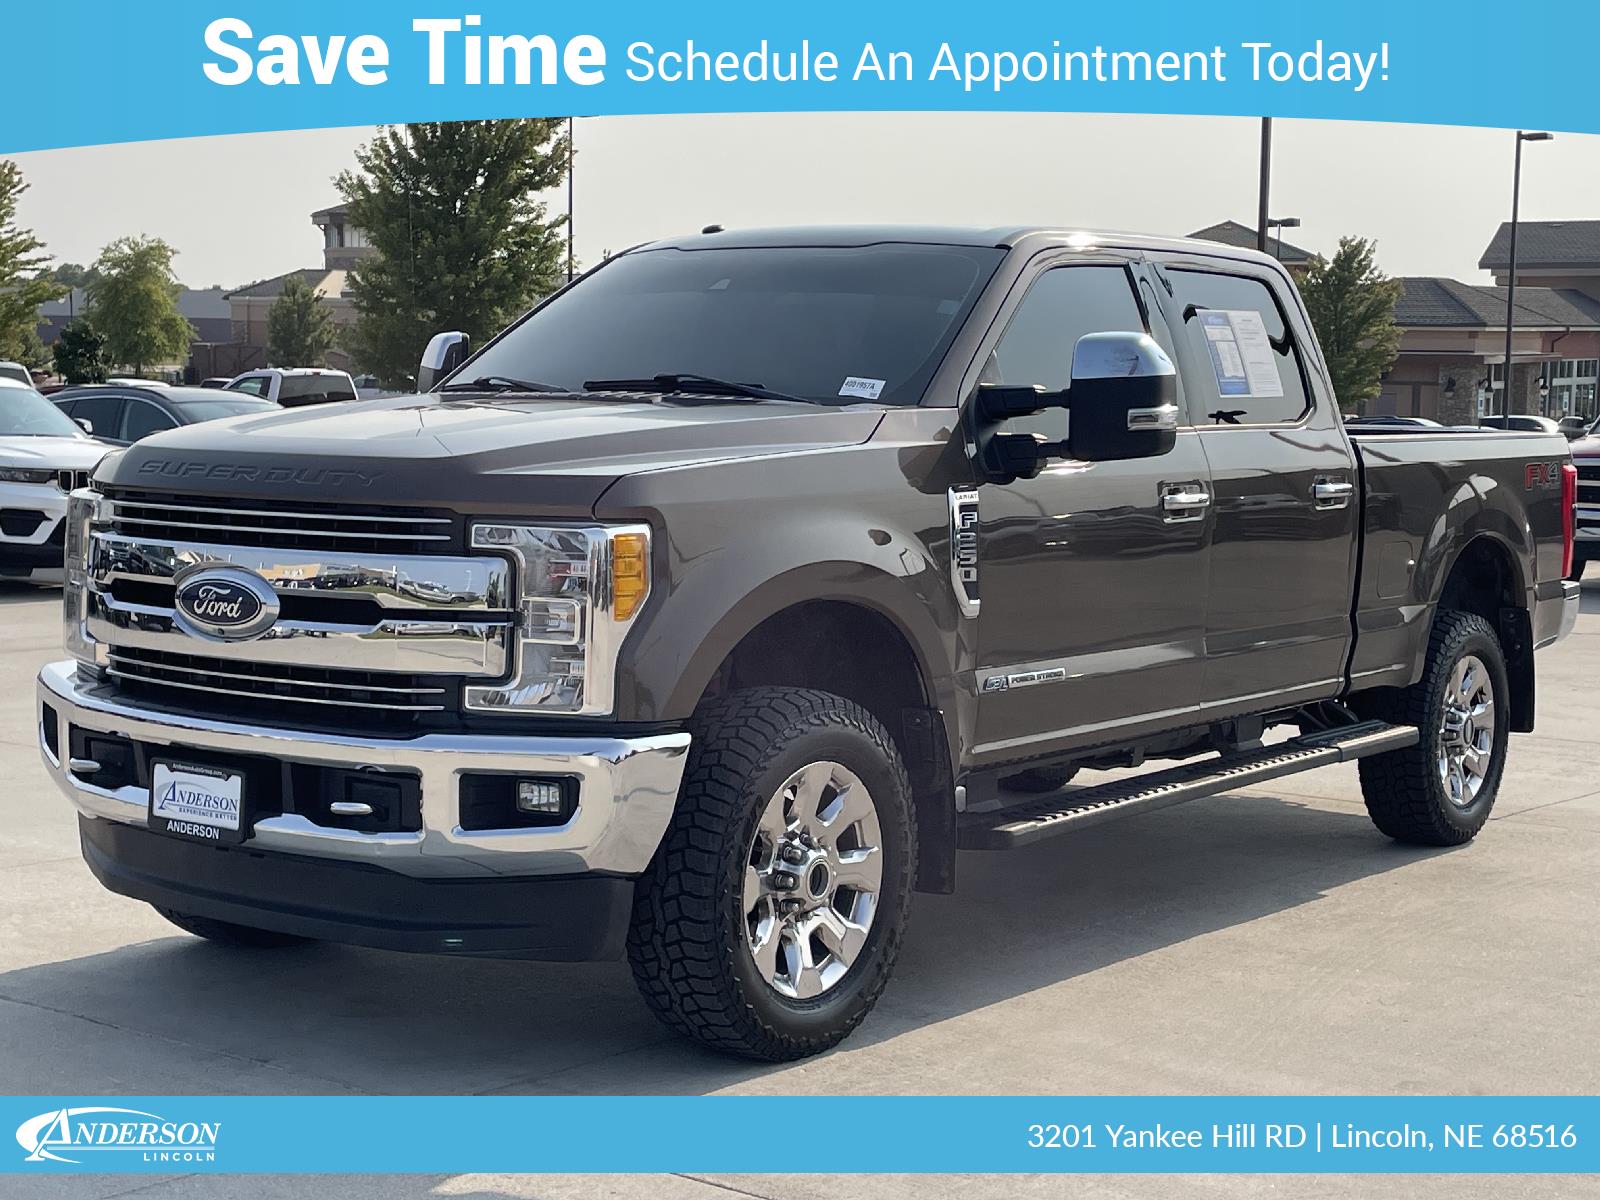 Used 2017 Ford Super Duty F-250 SRW Lariat Stock: 4001957a